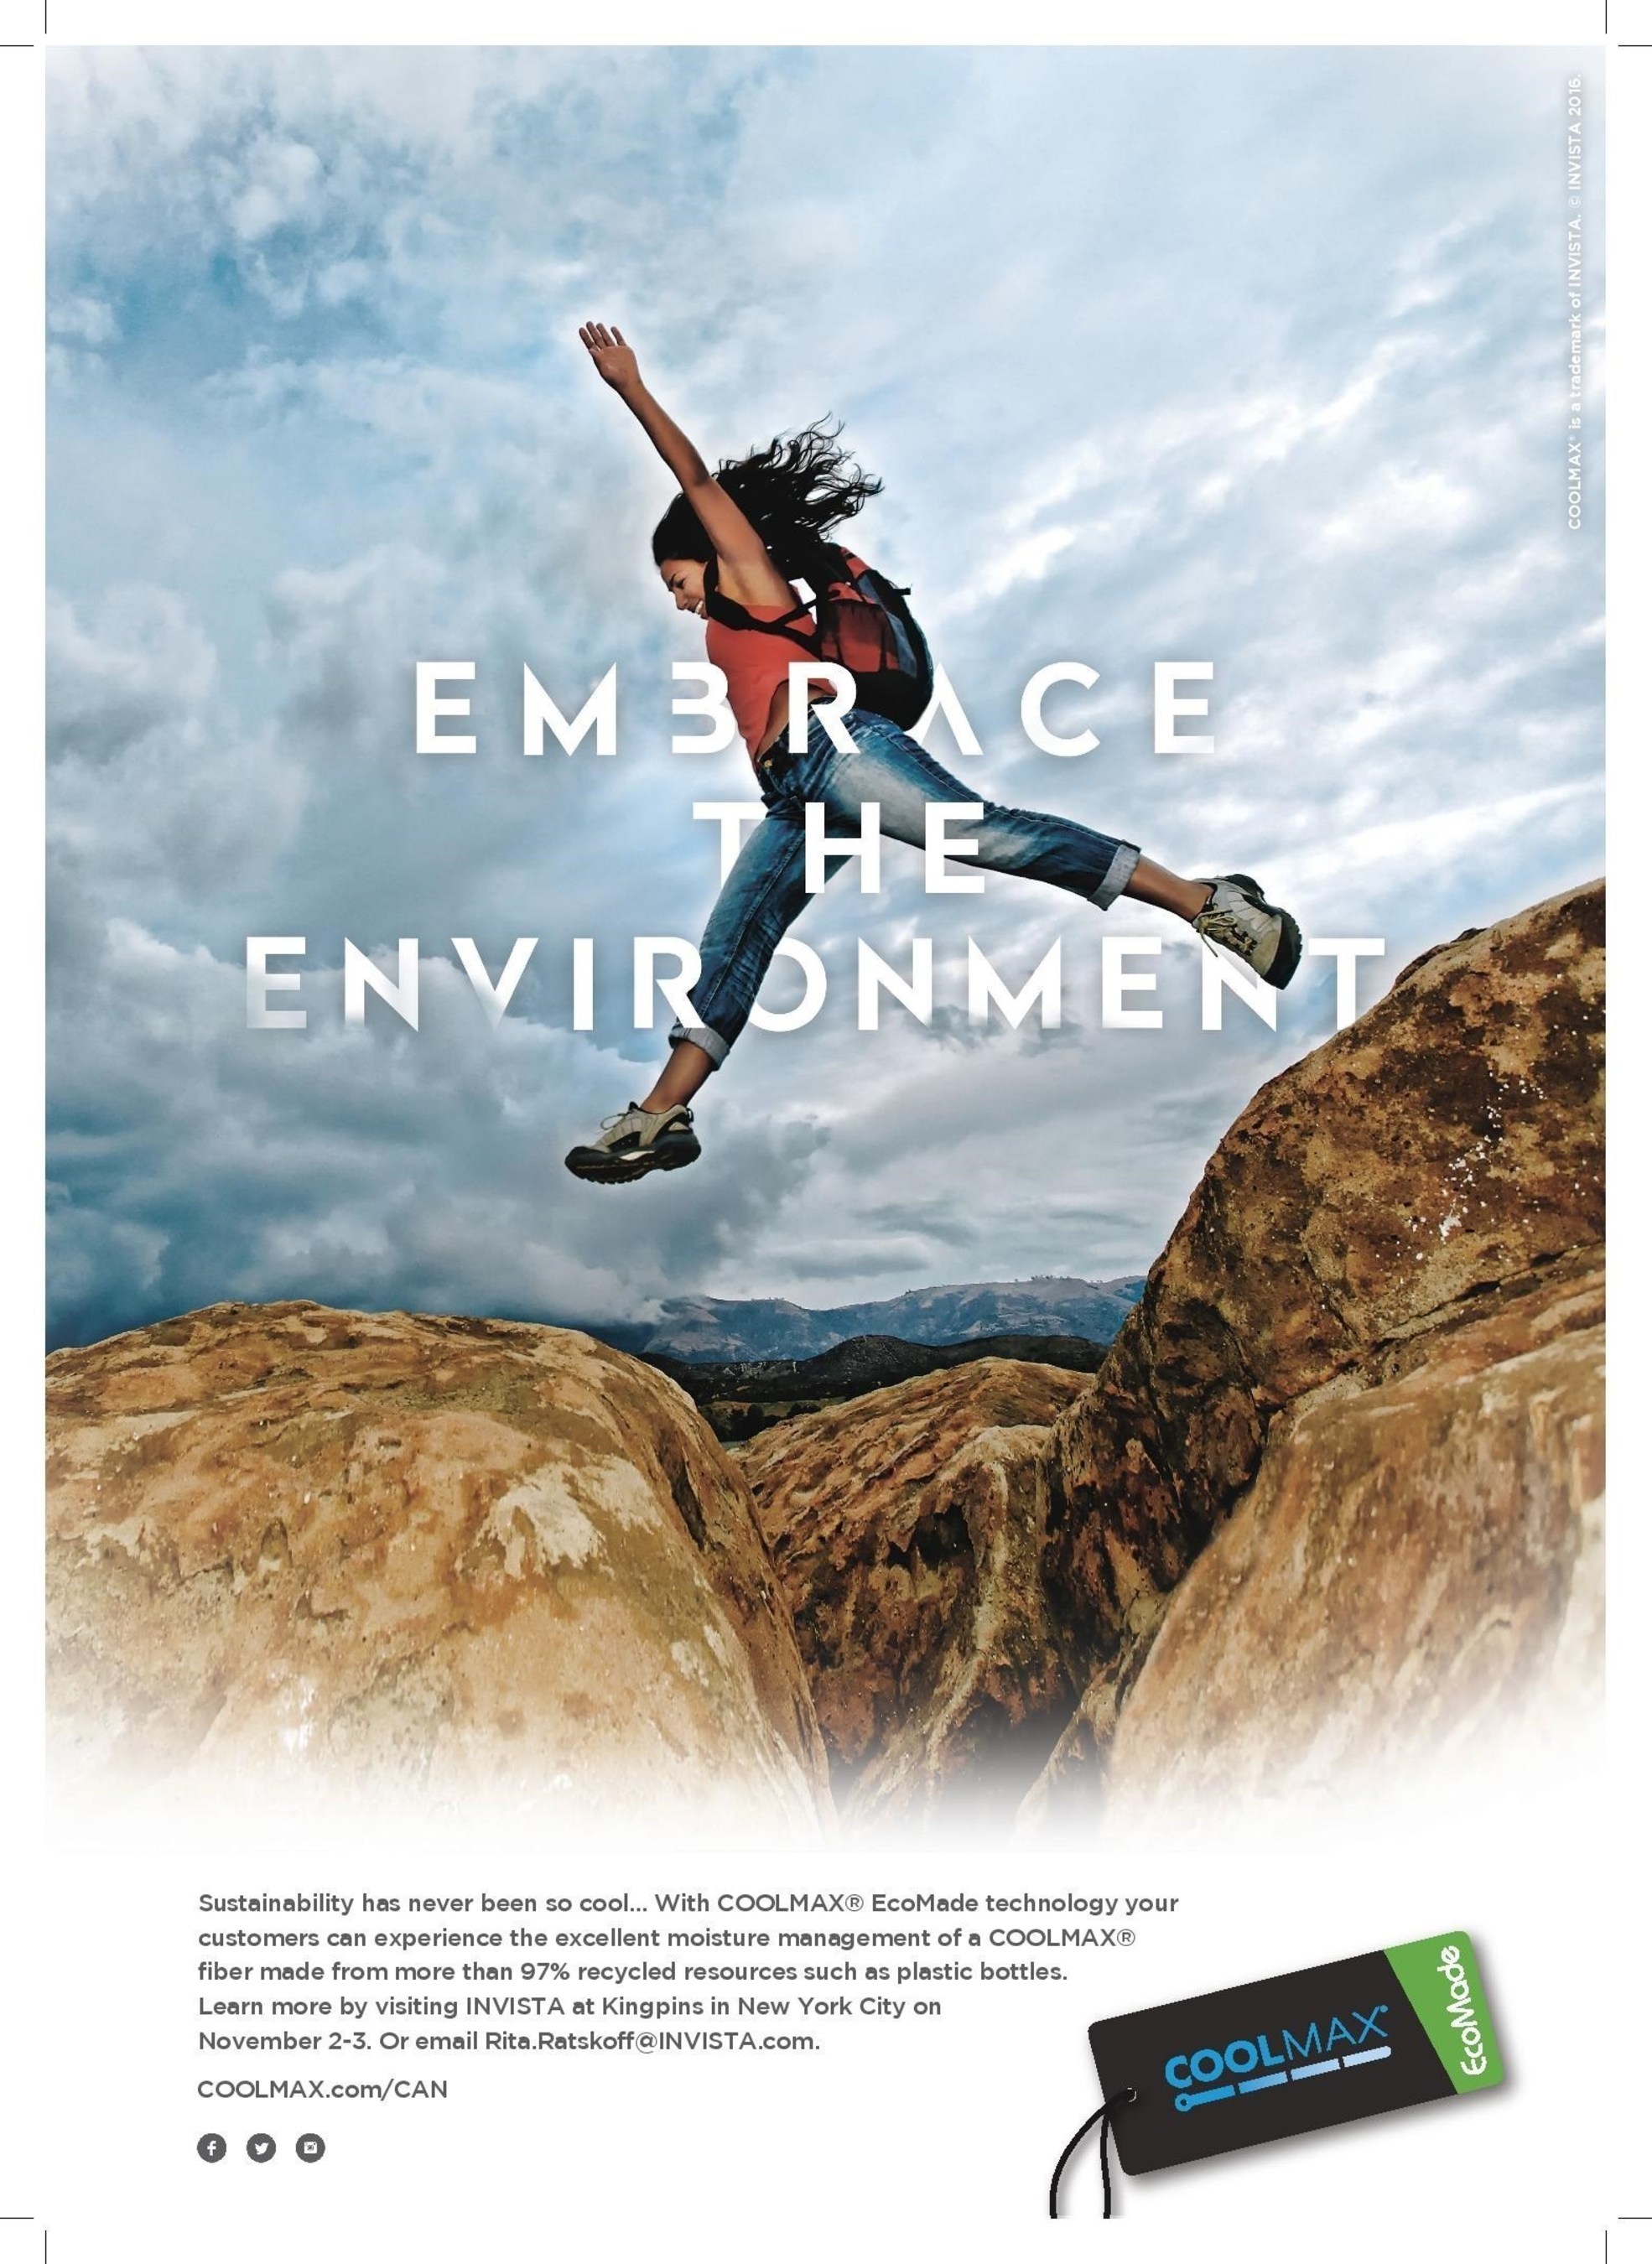 New "Embrace the Environment" advertising campaign promotes COOLMAX(R) EcoMade technology for denim.